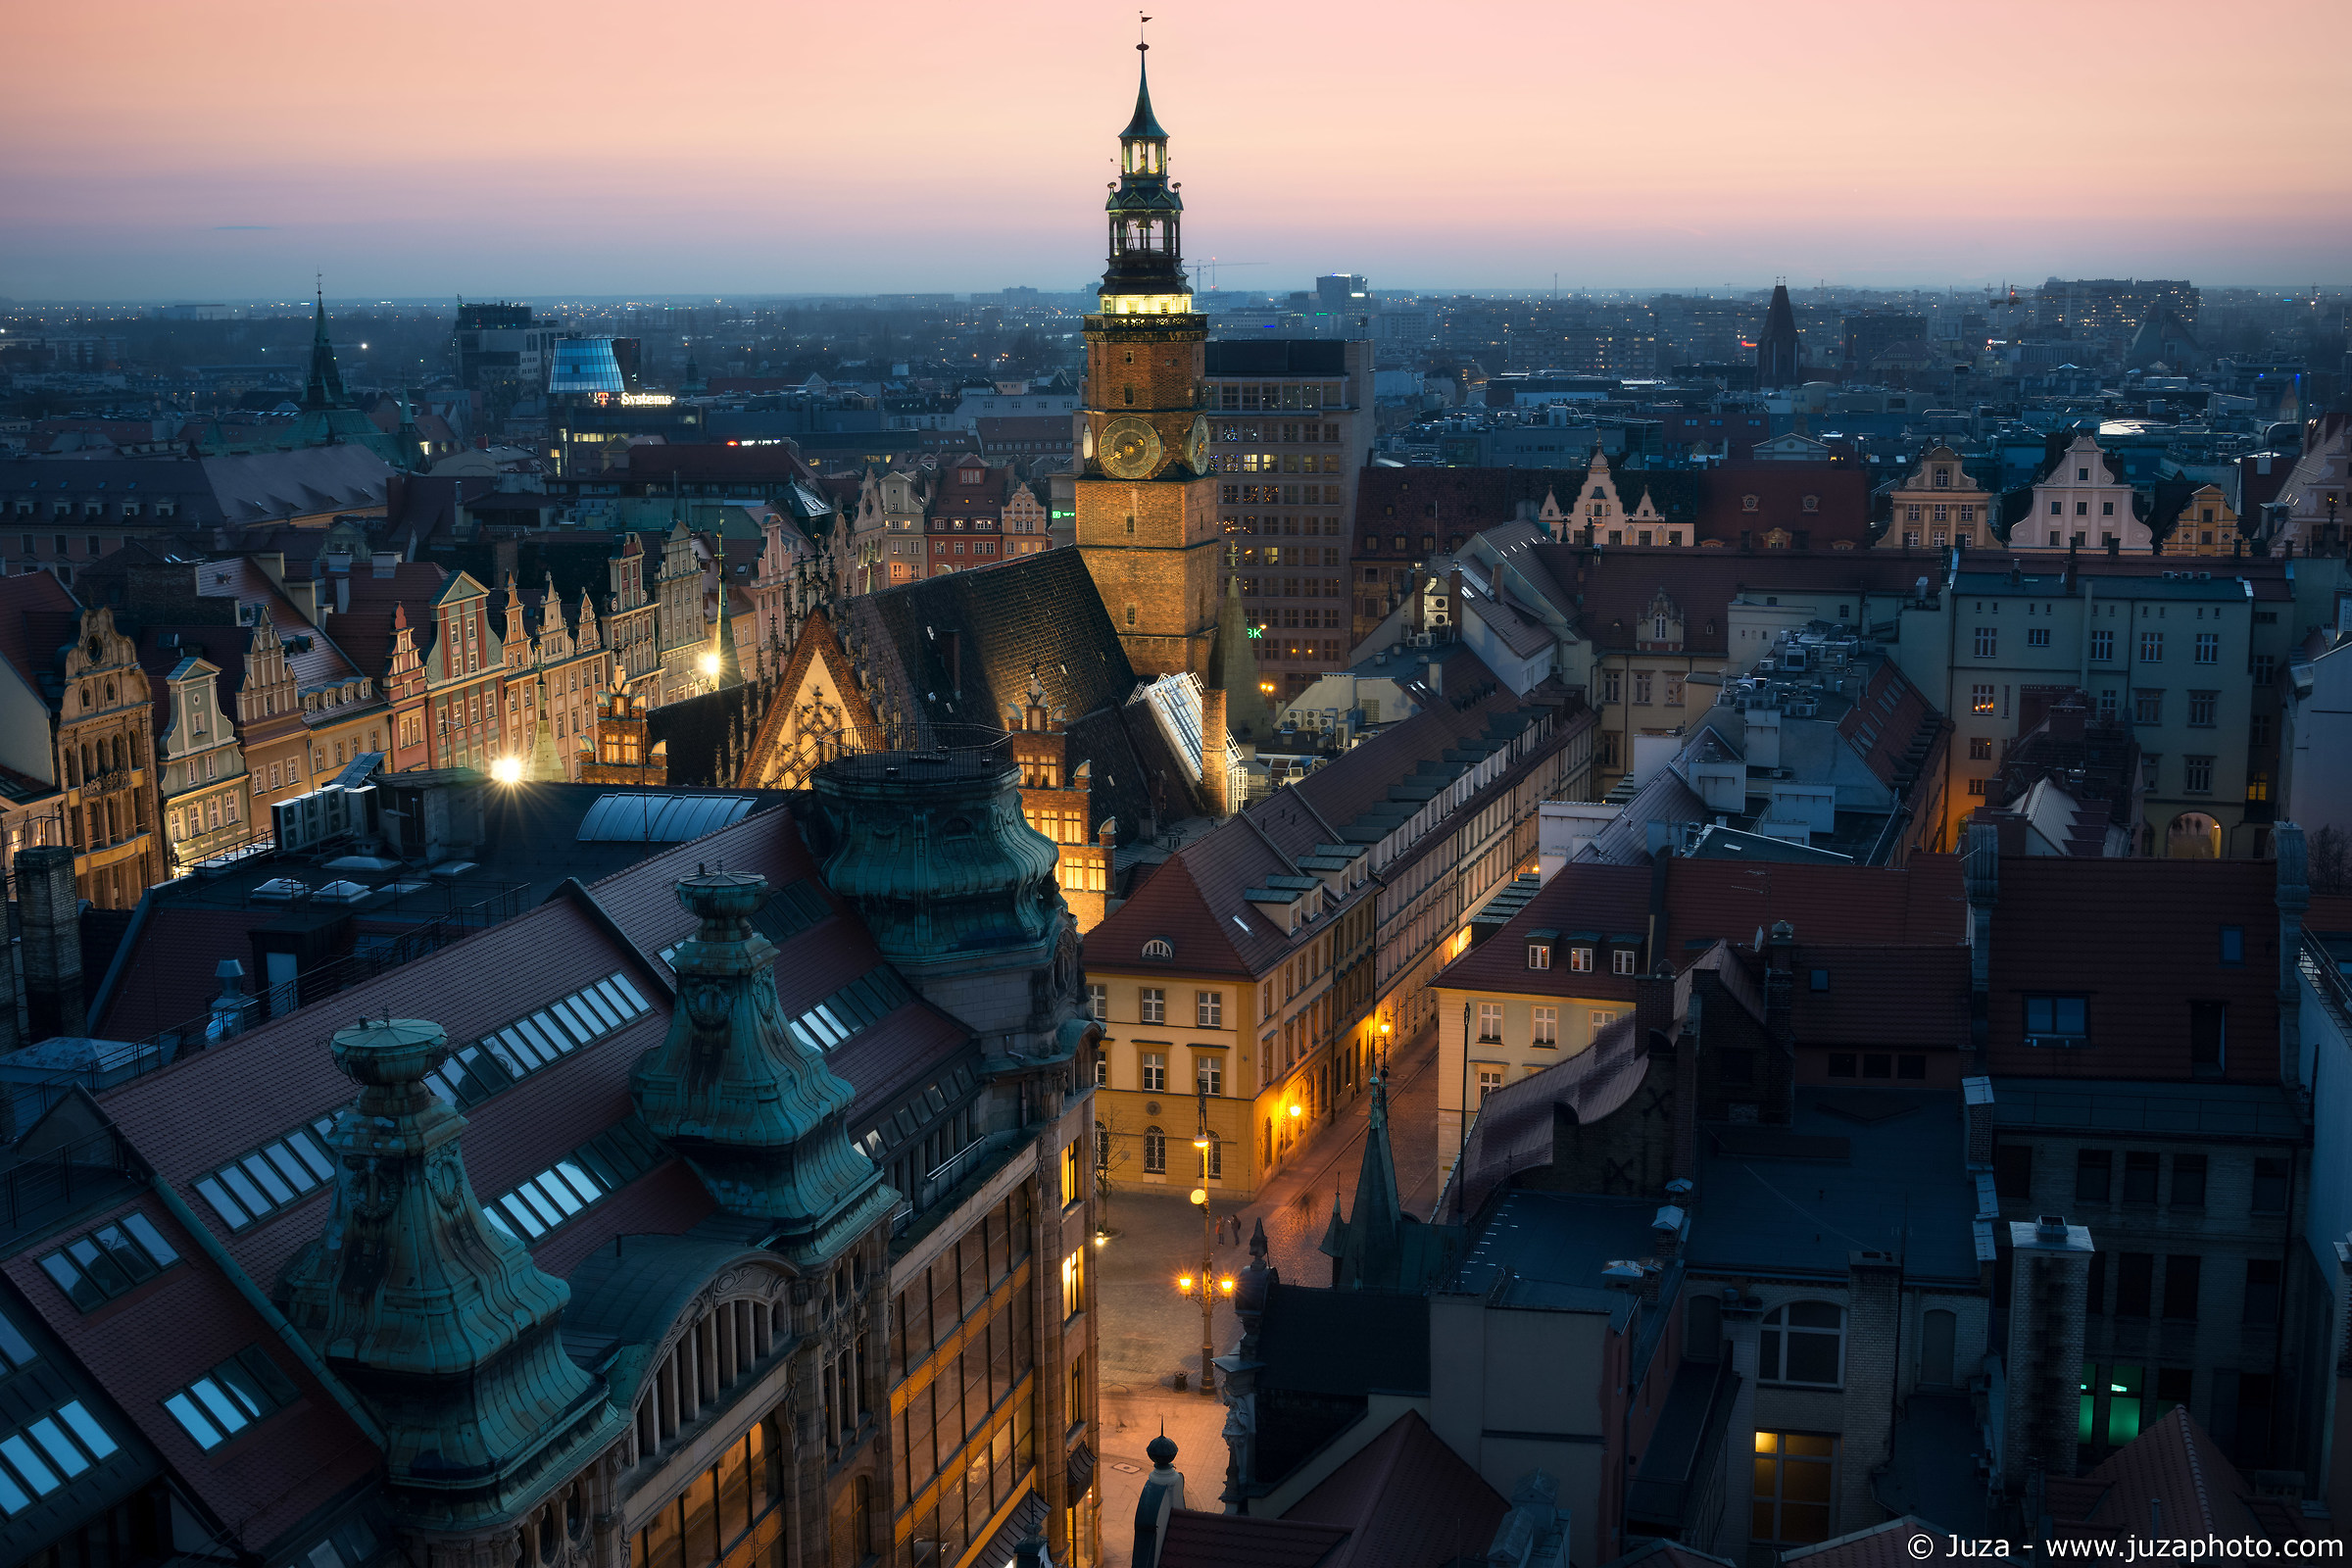 The blue hour in Wroclaw...